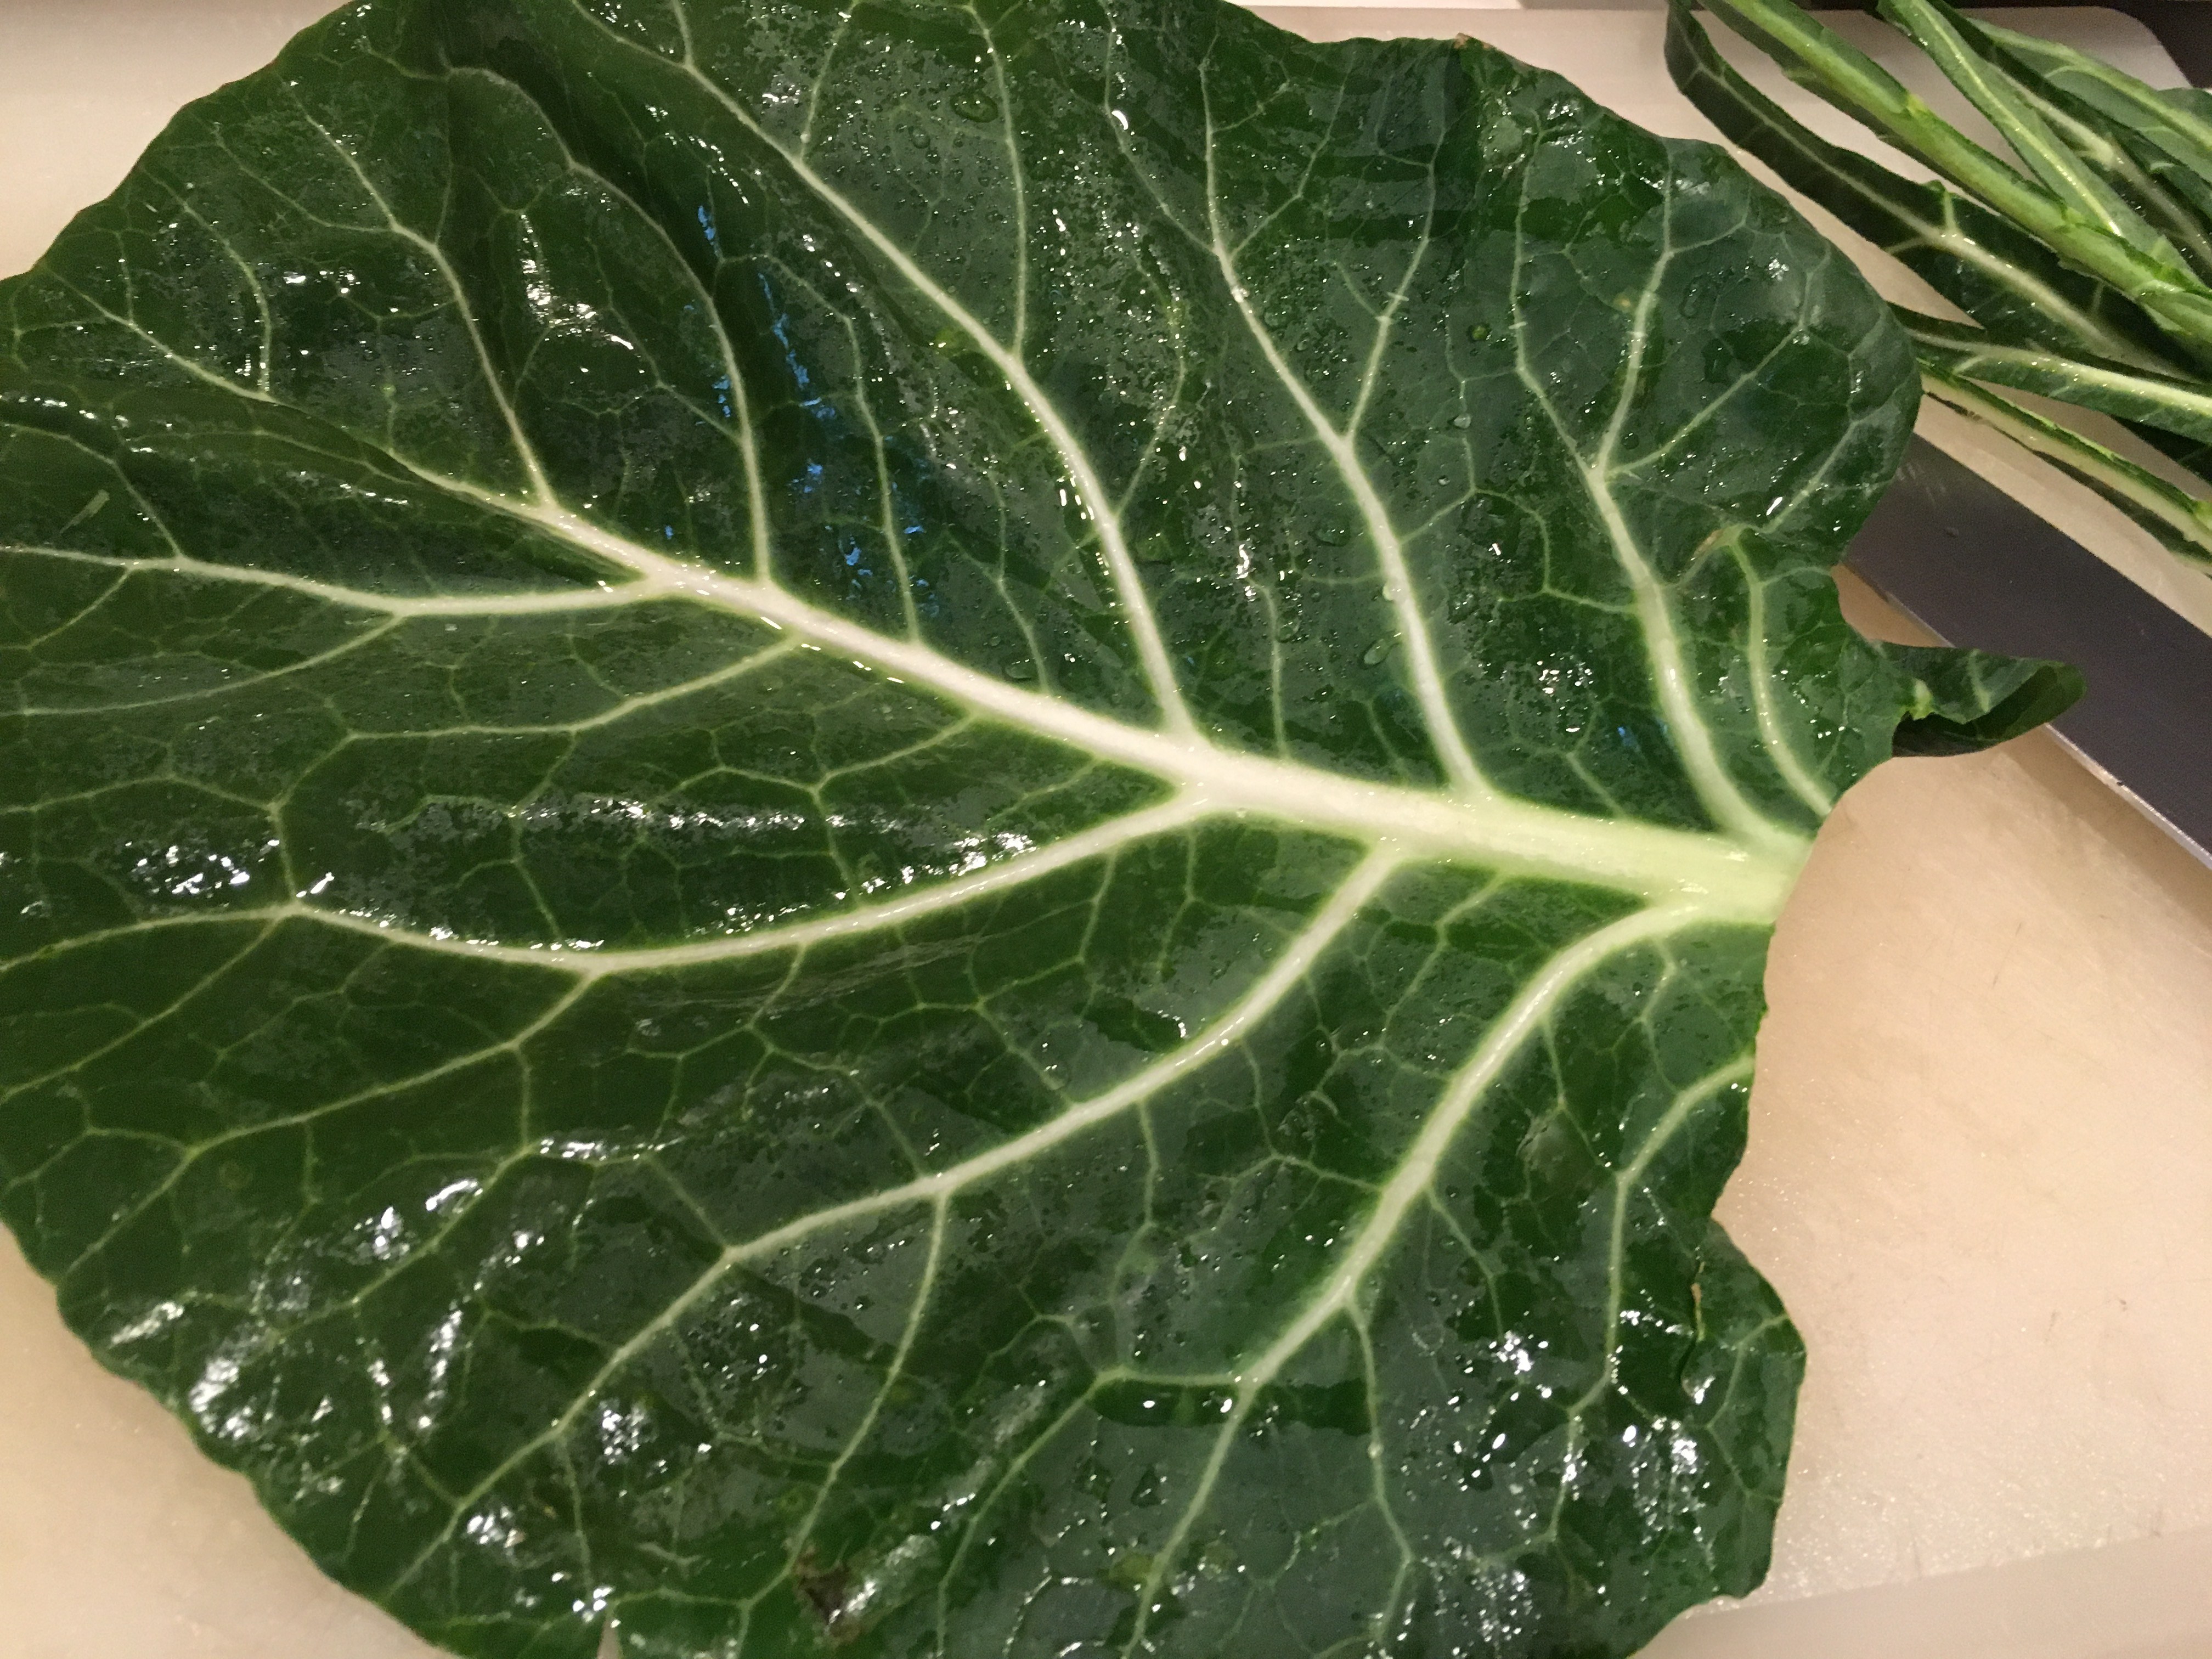 Lasagna with Collard Greens, or That's Amore | cooking the kitchen